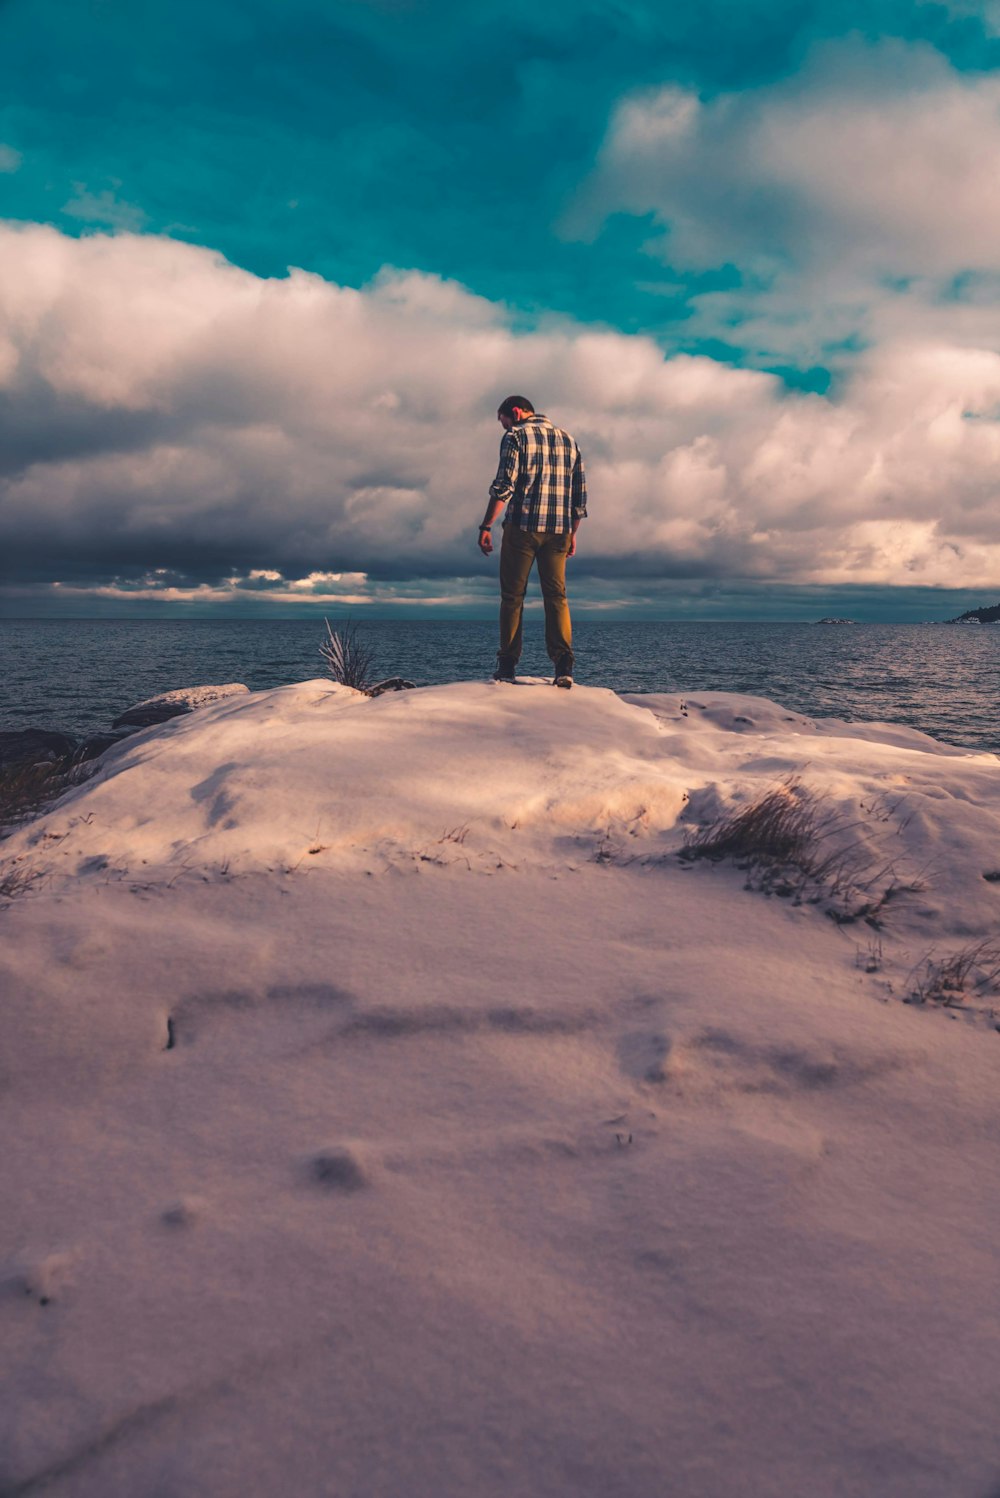 man standing on snow covered land while facing body of water